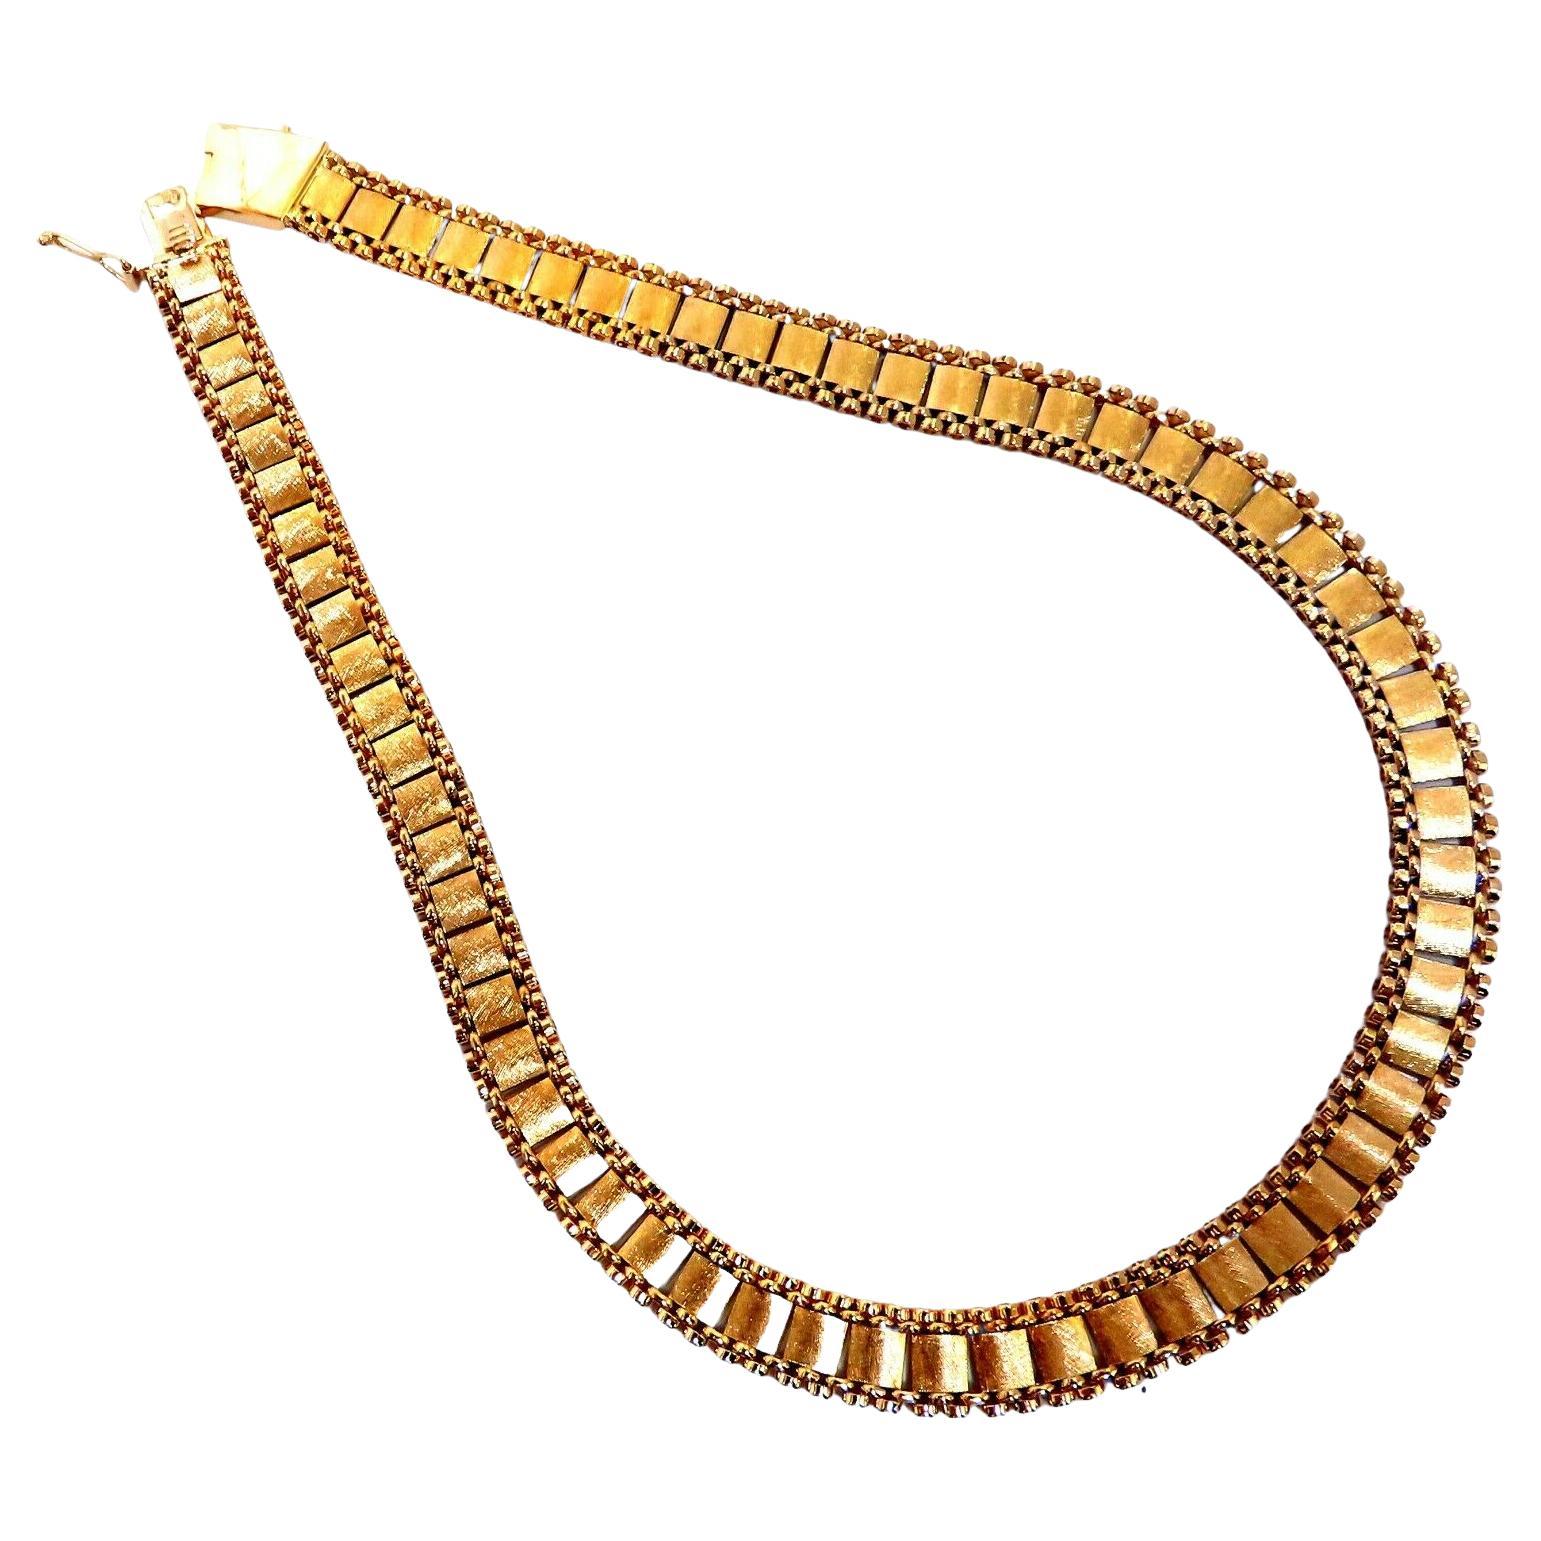 Reversible 5 Tier Curbed Band Link Gold Necklace 14kt Gold For Sale